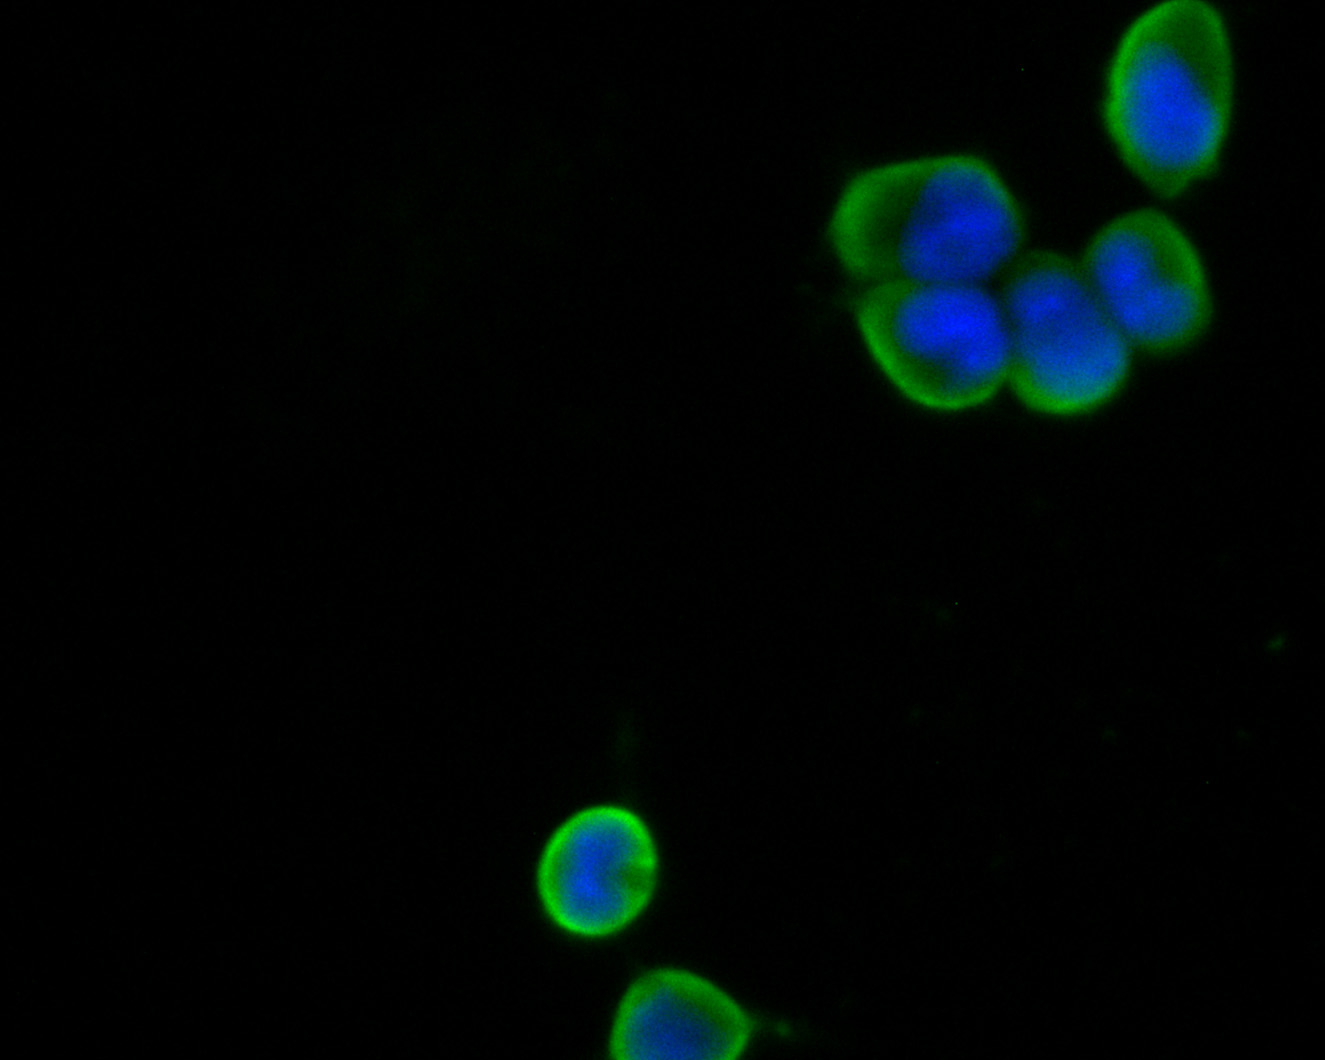 ICC staining of GNB3 in F9 cells (green). Formalin fixed cells were permeabilized with 0.1% Triton X-100 in TBS for 10 minutes at room temperature and blocked with 1% Blocker BSA for 15 minutes at room temperature. Cells were probed with the primary antibody (HA500127, 1/50) for 1 hour at room temperature, washed with PBS. Alexa Fluor®488 Goat anti-Rabbit IgG was used as the secondary antibody at 1/1,000 dilution. The nuclear counter stain is DAPI (blue).